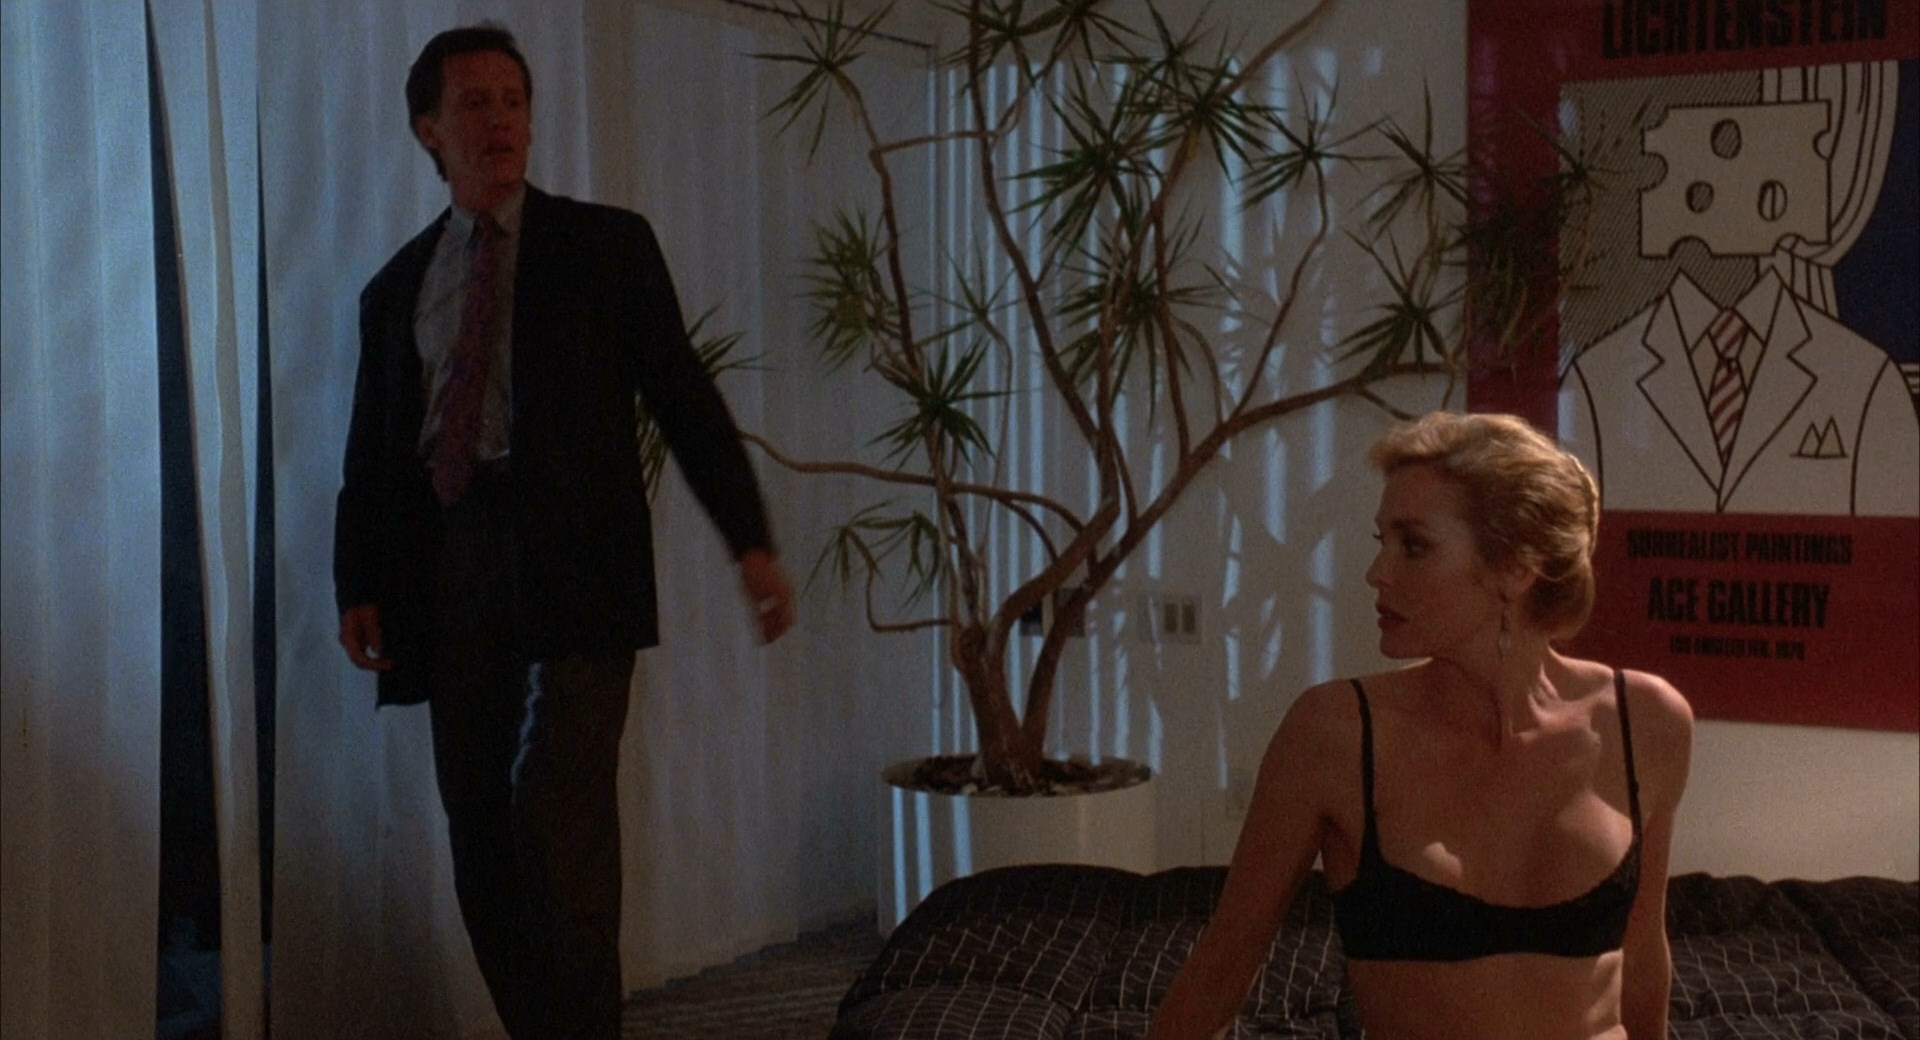 Victoria Tennant is wearing bra and panties in this clip.